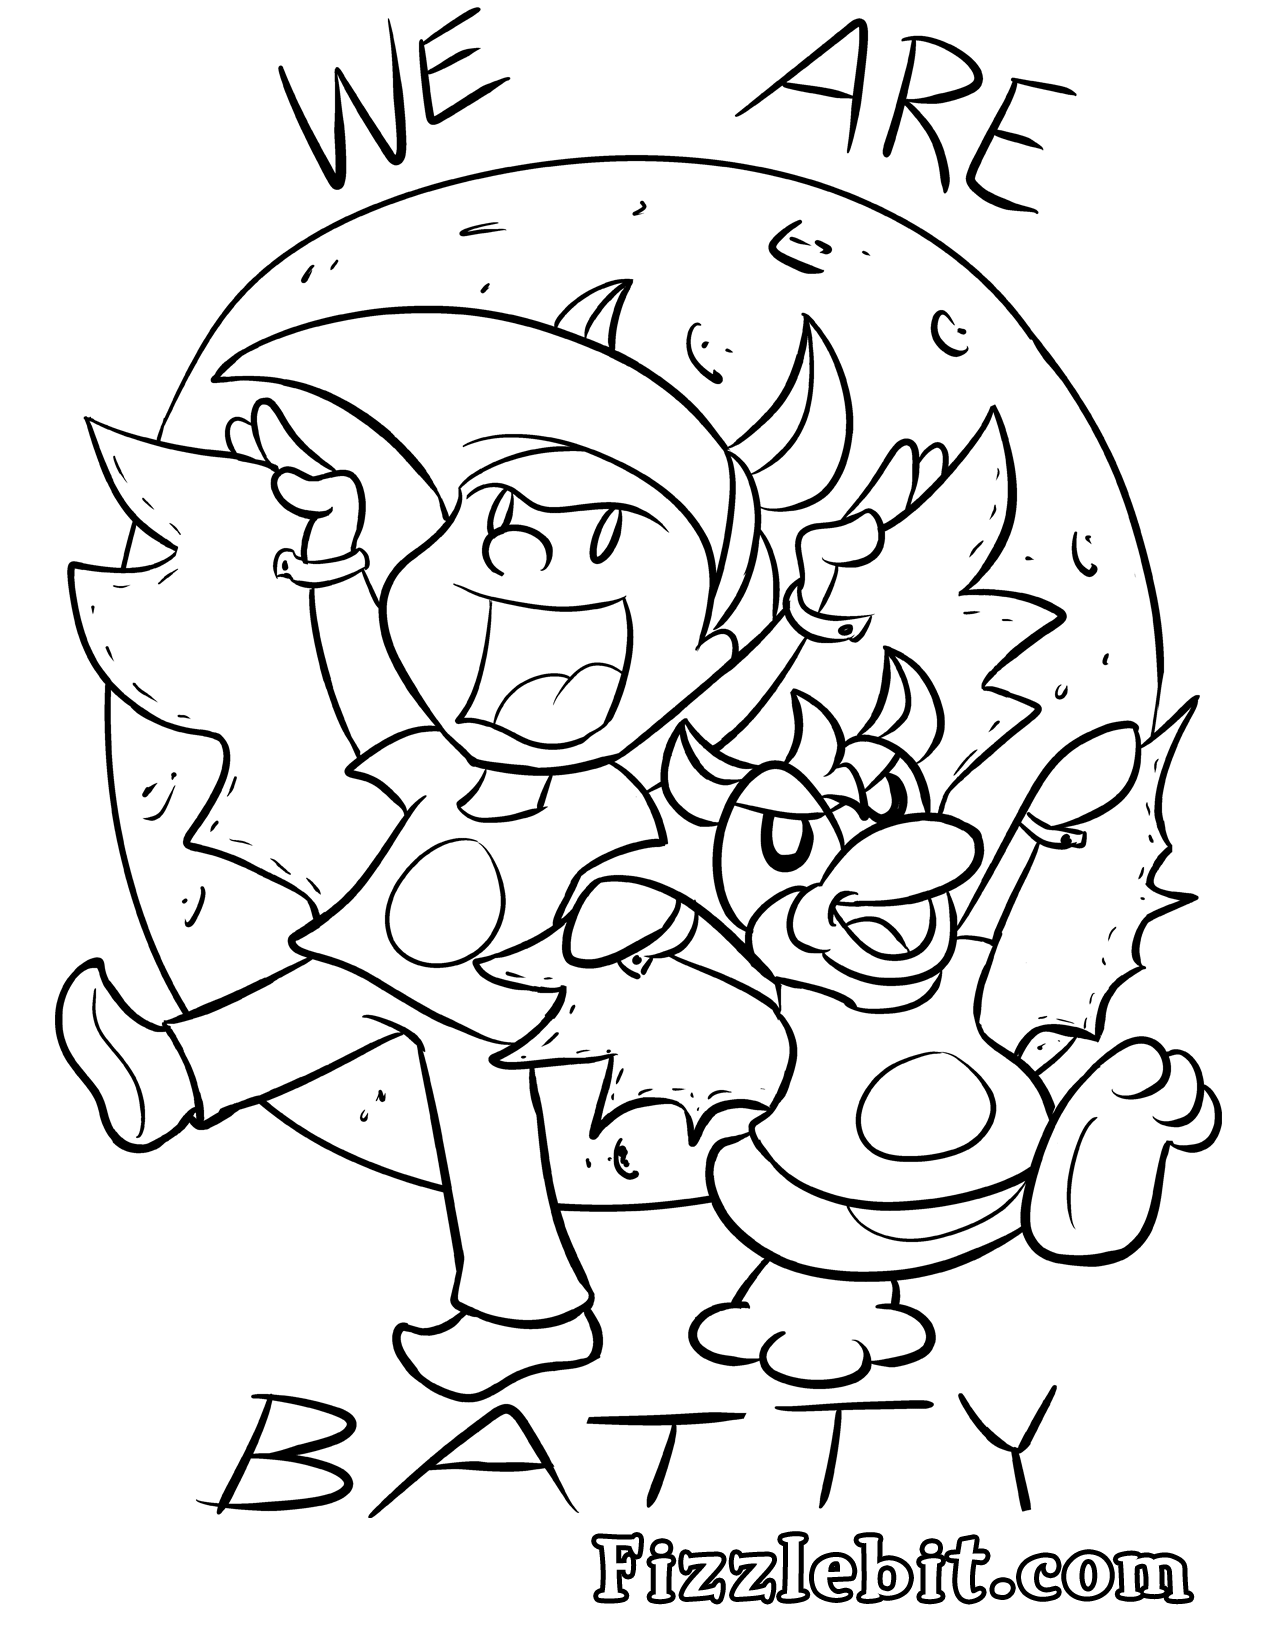 Coloring page of Lydia & Fizzlebit being BATTY.